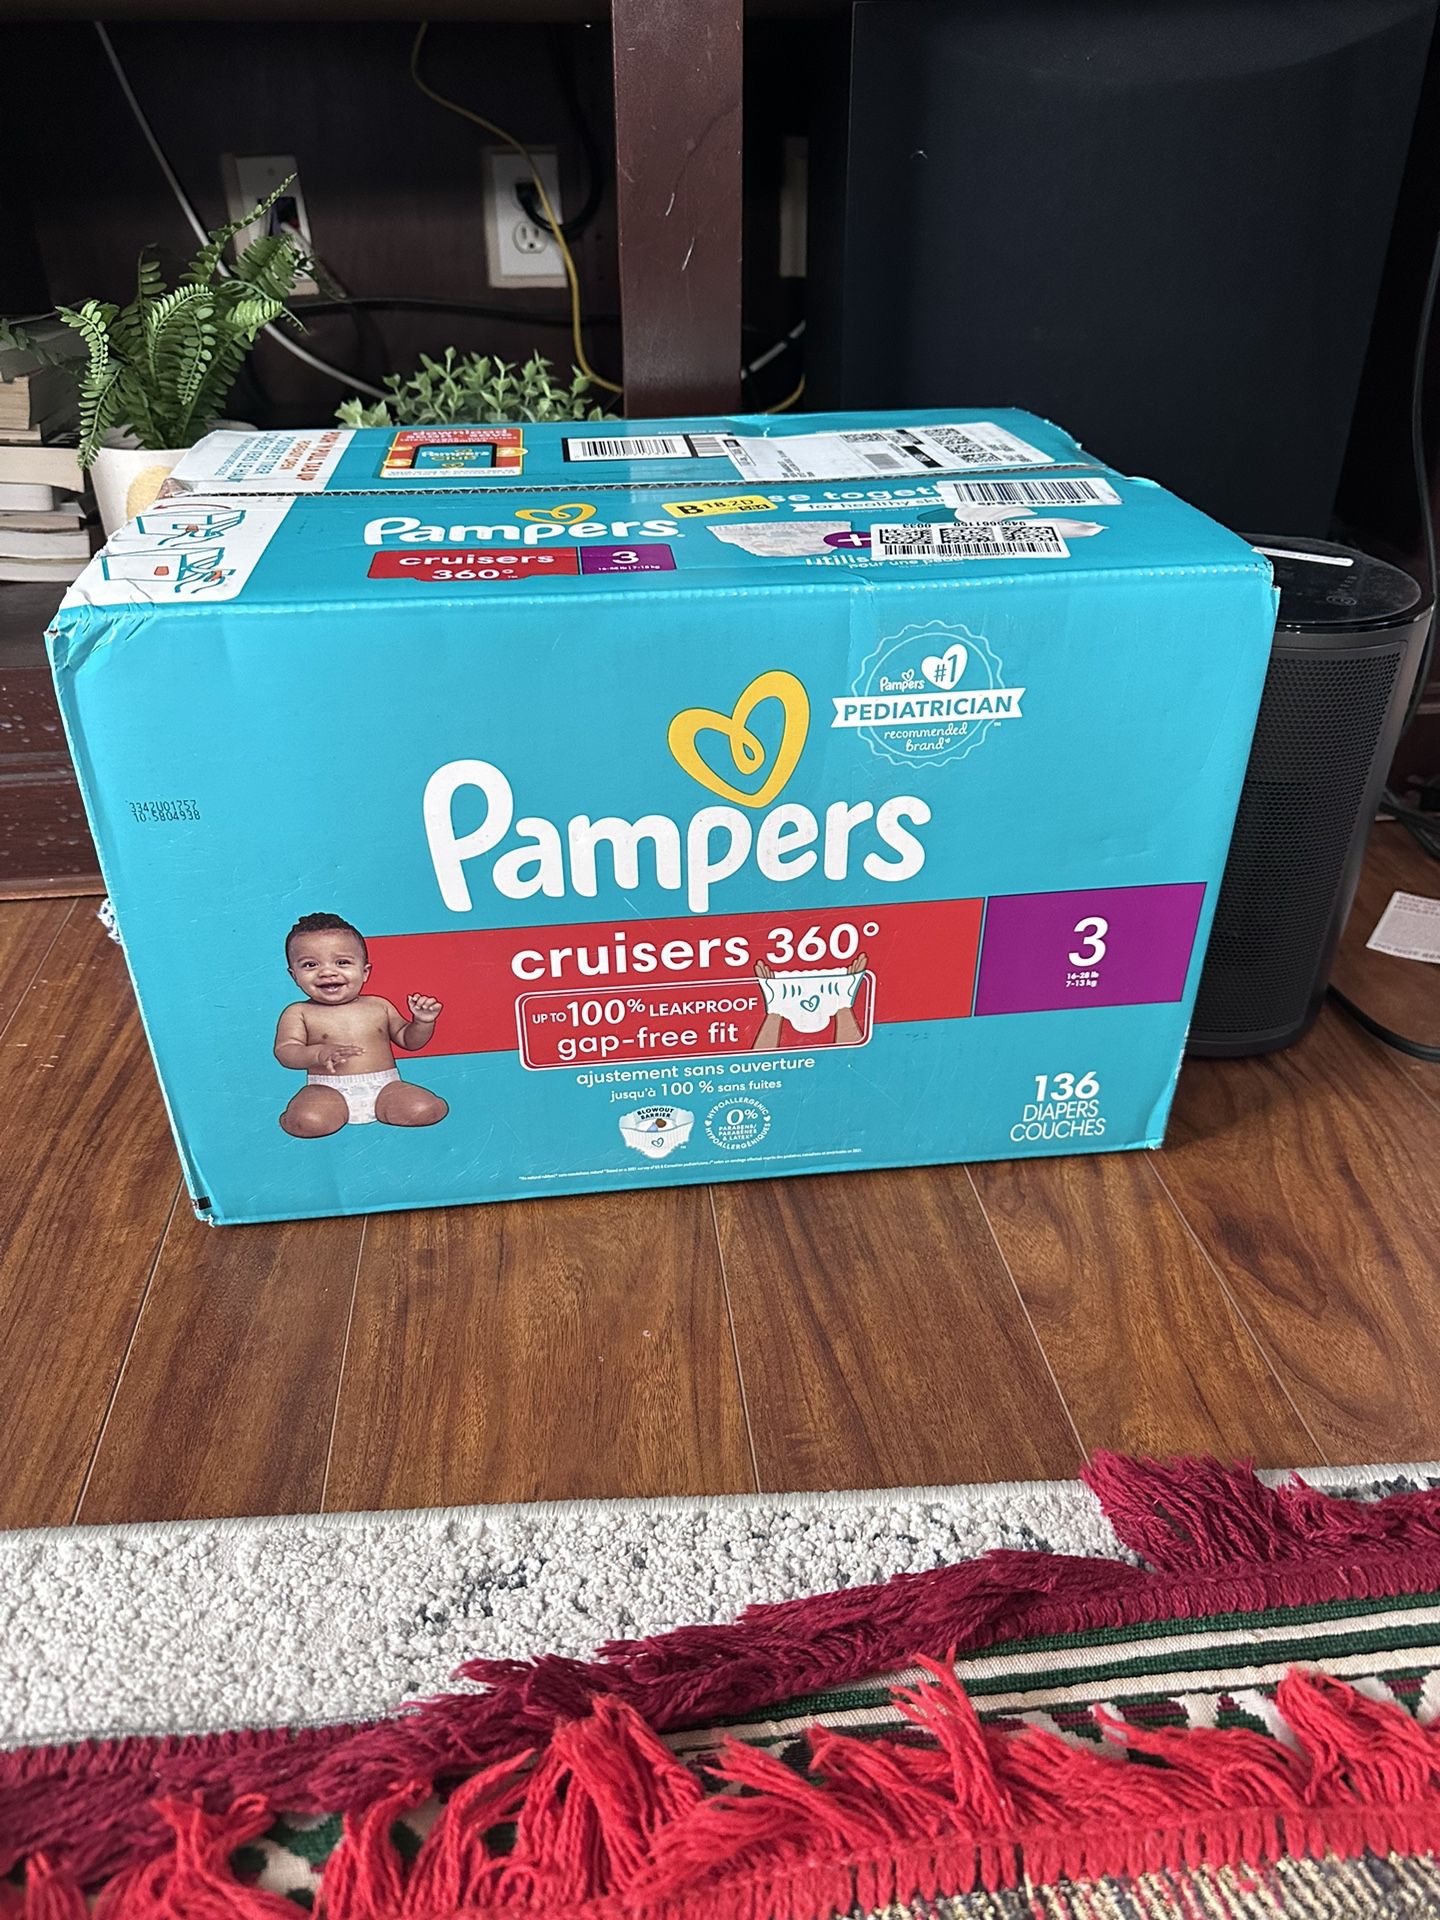 Pampers Cruisers 360 - Unopened Box